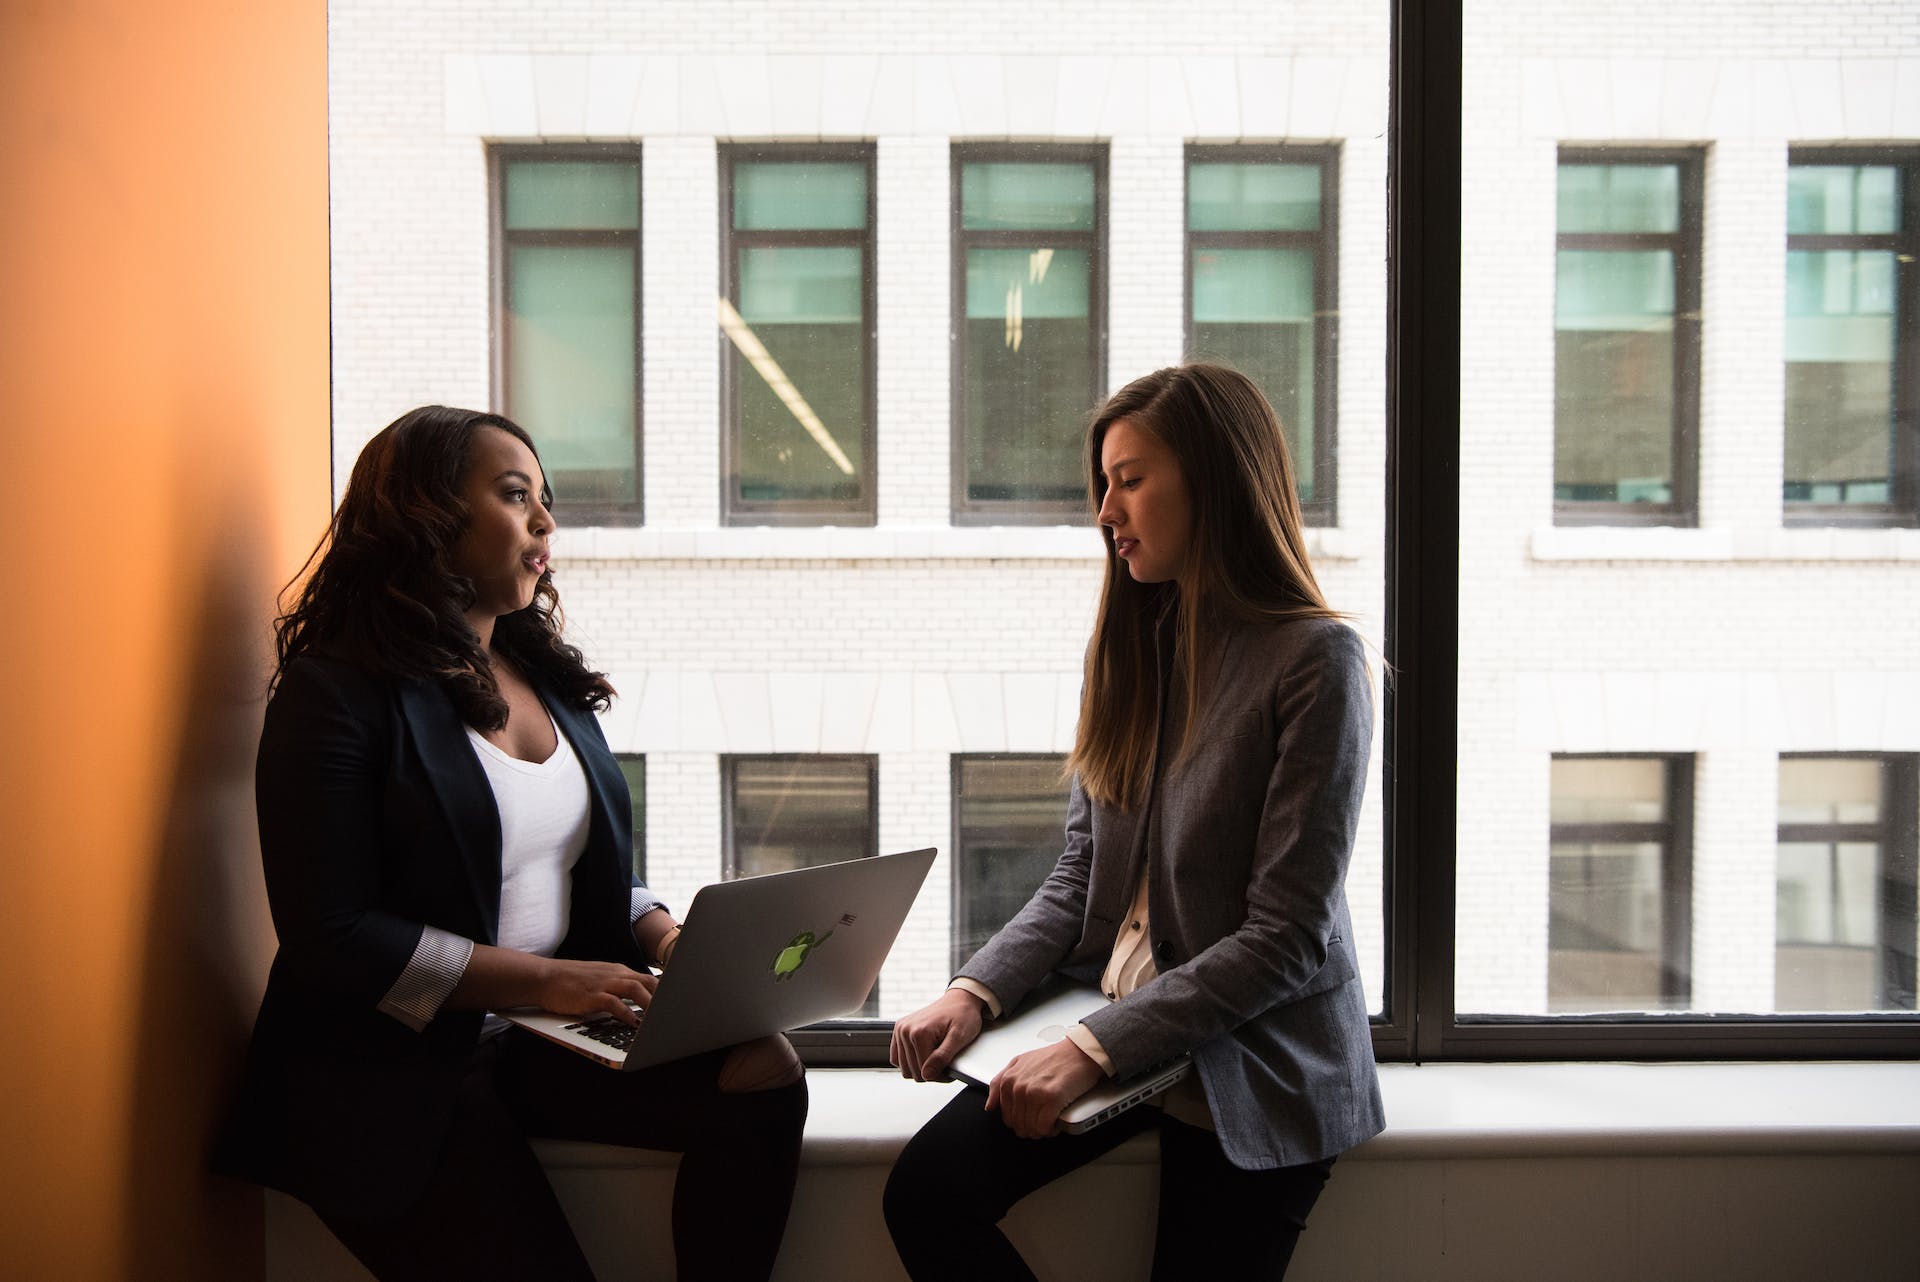 Two women chatting at their workplace | Source: Pexels